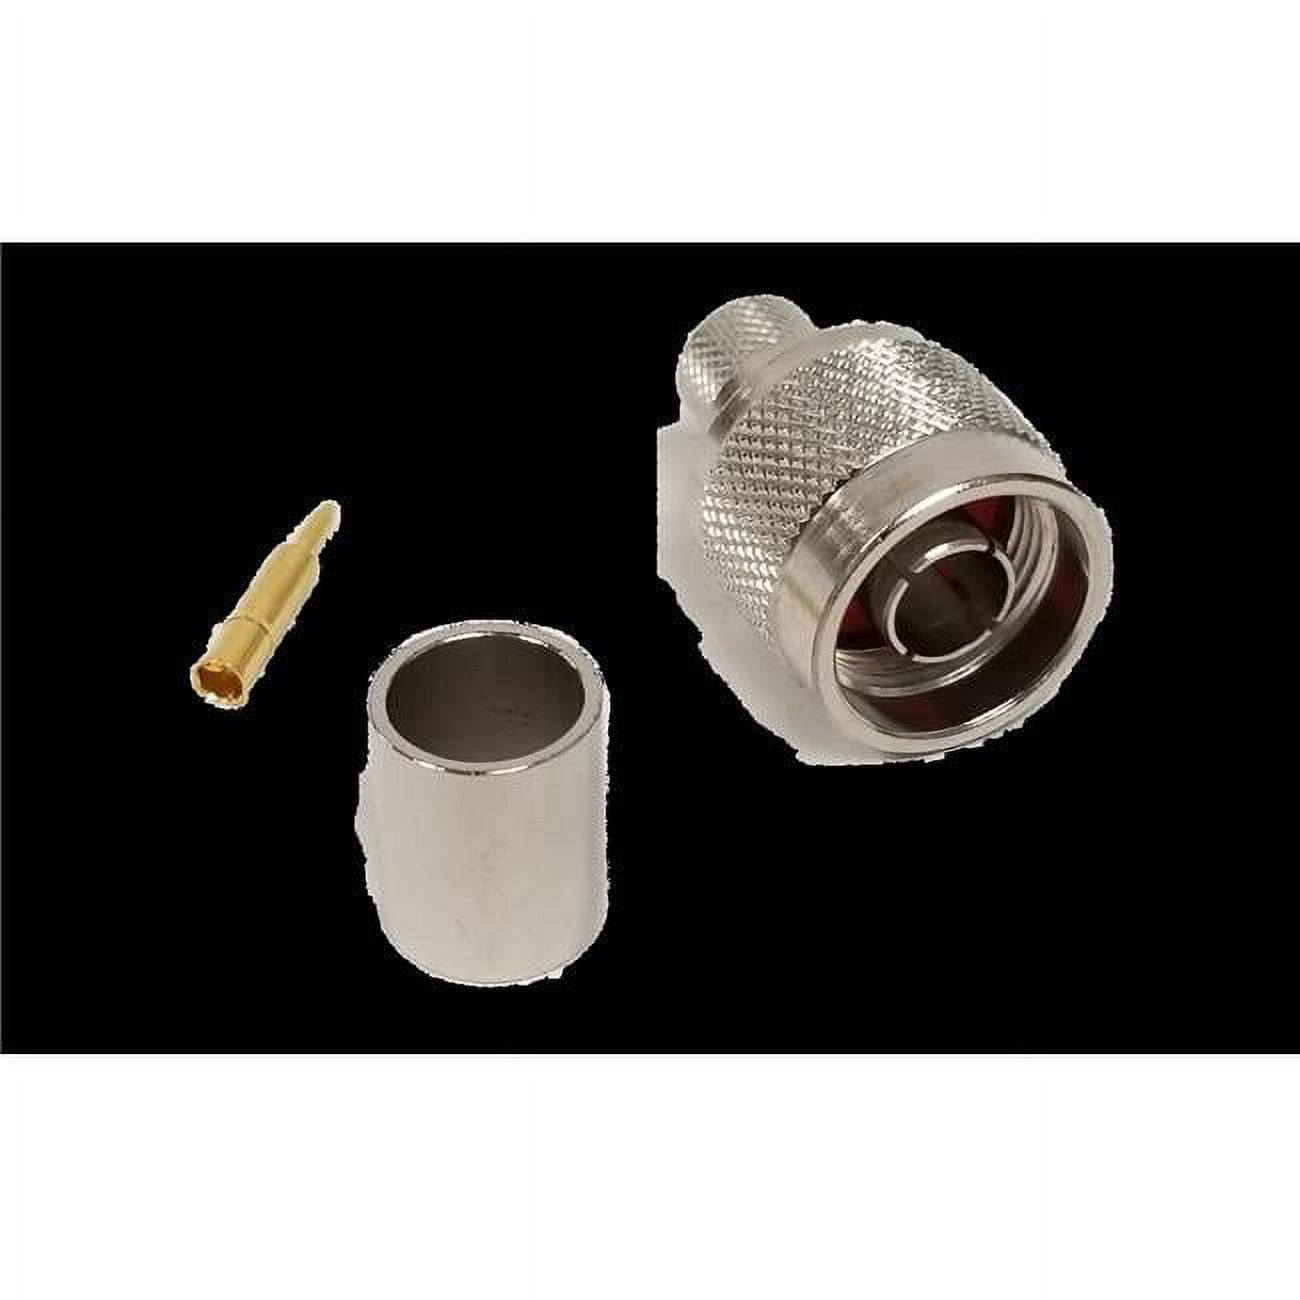 Picture of Procomm N019913C Male N Connector for 9913 Belden Coaxial Cable